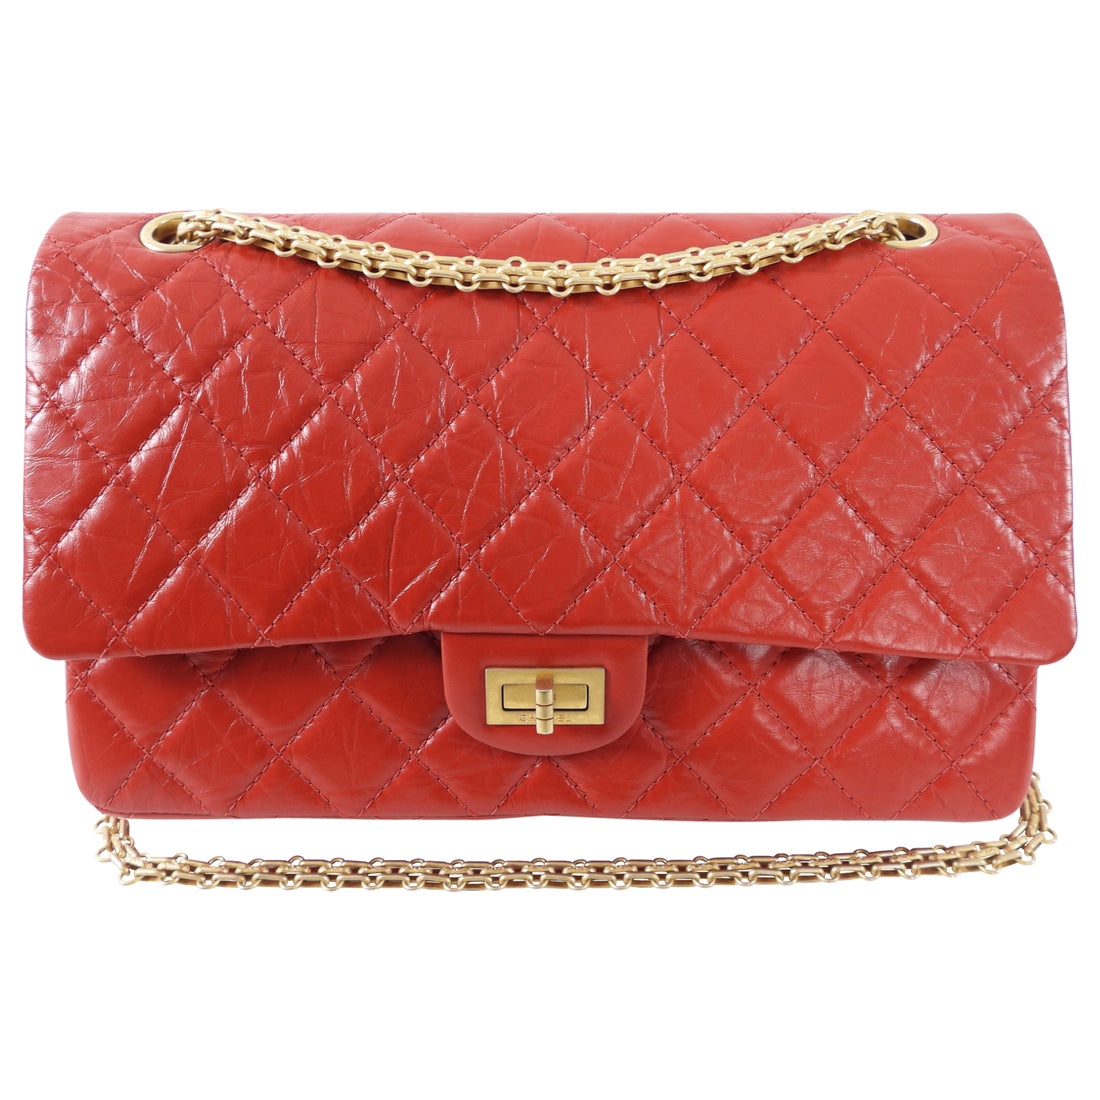 Chanel 2.55 reissue 226 classic double flap bag, Luxury, Bags